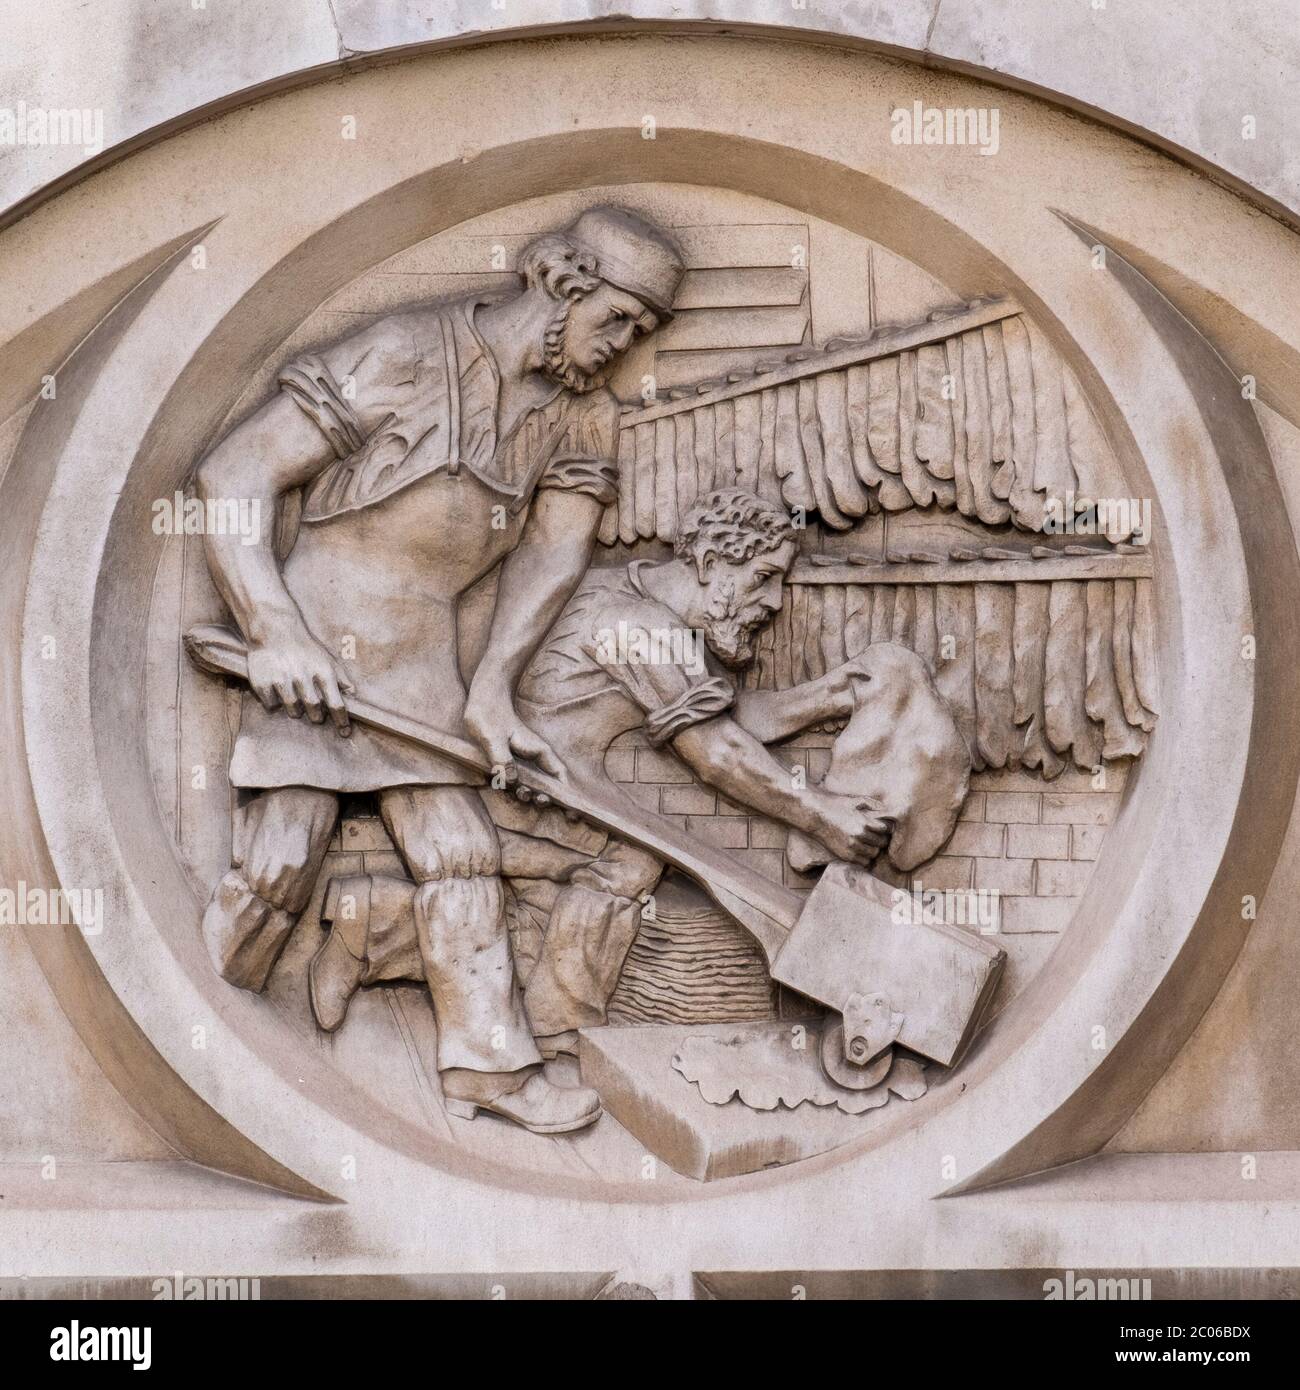 Embossed round frieze, one of 5, showing the leather tanning process on the Victorian London Leather Hide and Wool Exchange building 1878, Bermondsey. Stock Photo